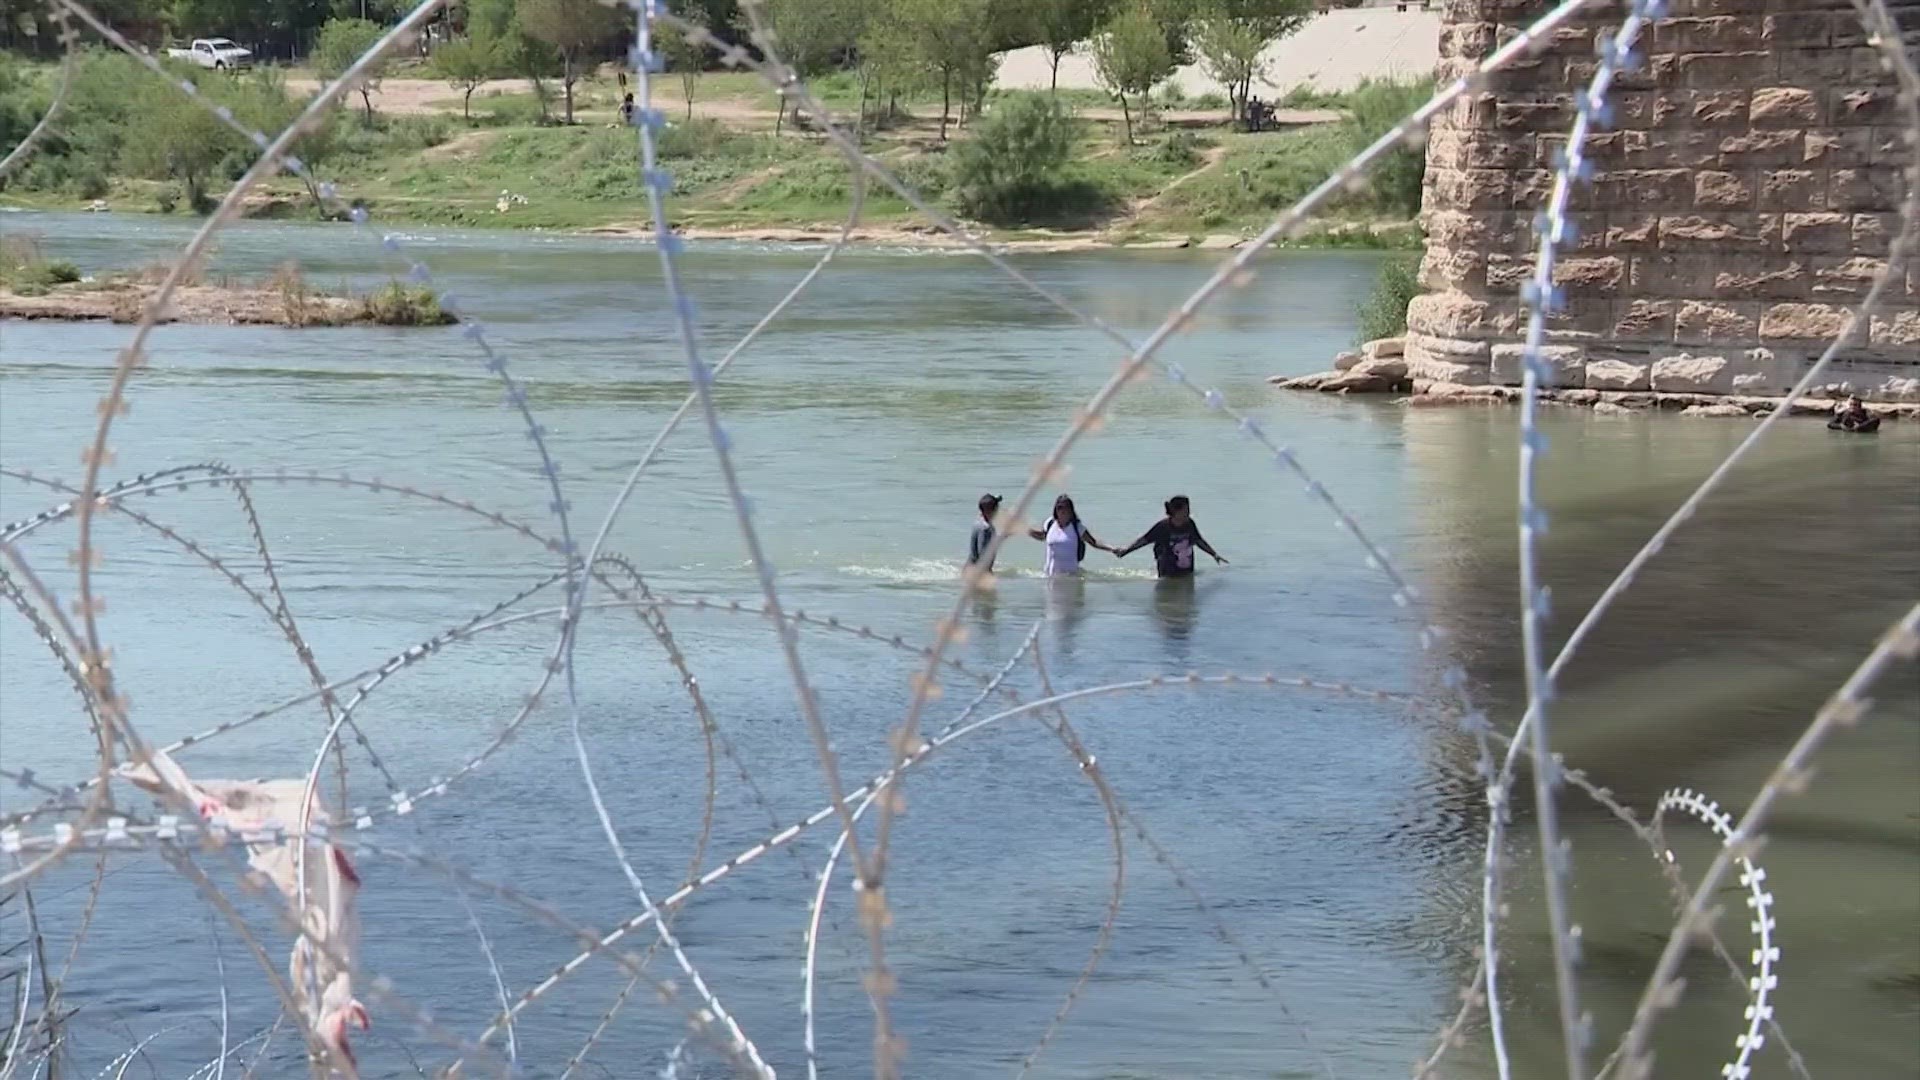 On Tuesday, CBS reporter Camilo Montoya-Galvez captured video of Texas National Guard soldiers putting up even more razor wire near Eagle Pass.